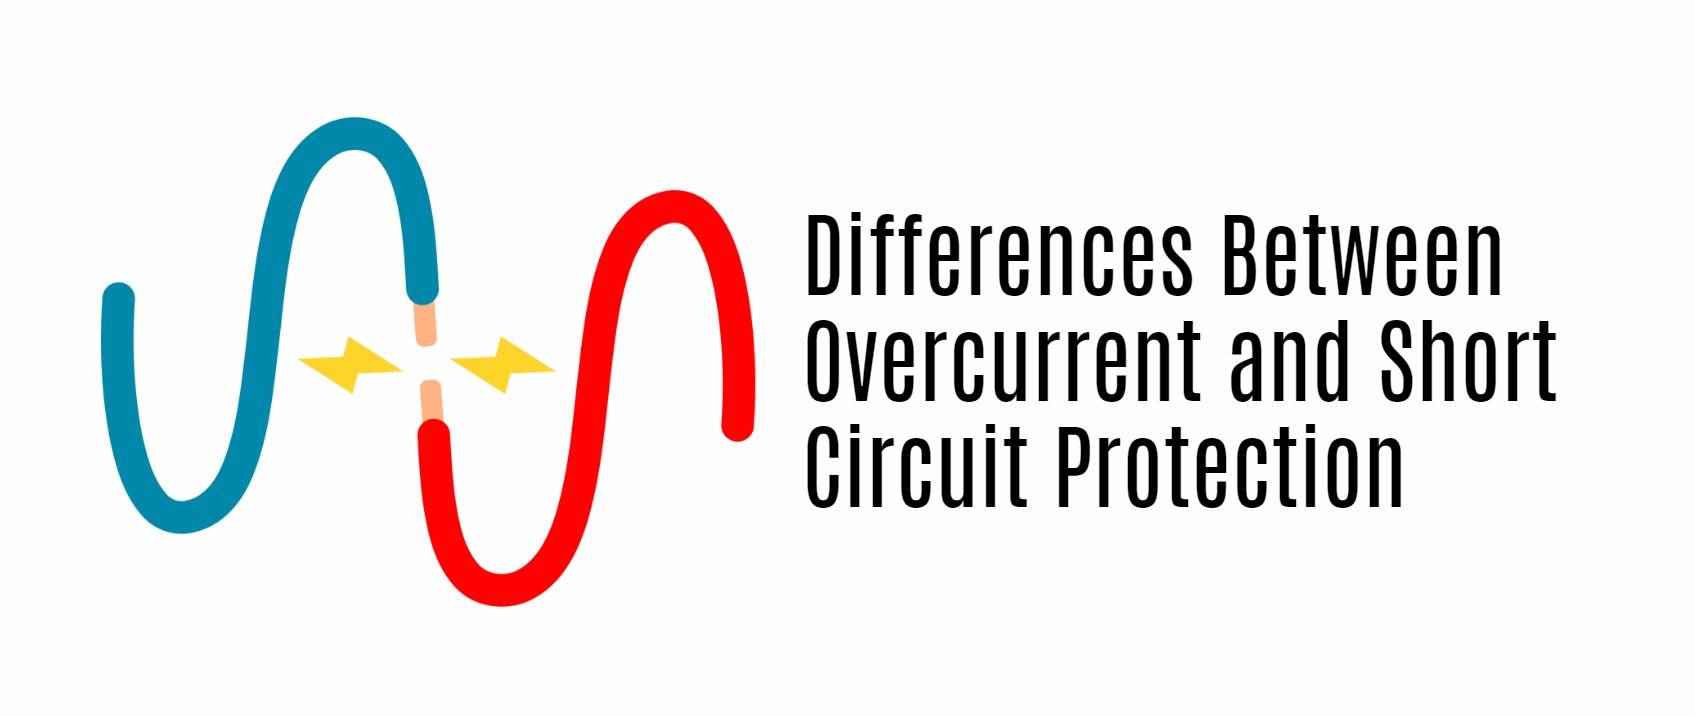 Differences Between Overcurrent and Short Circuit Protection